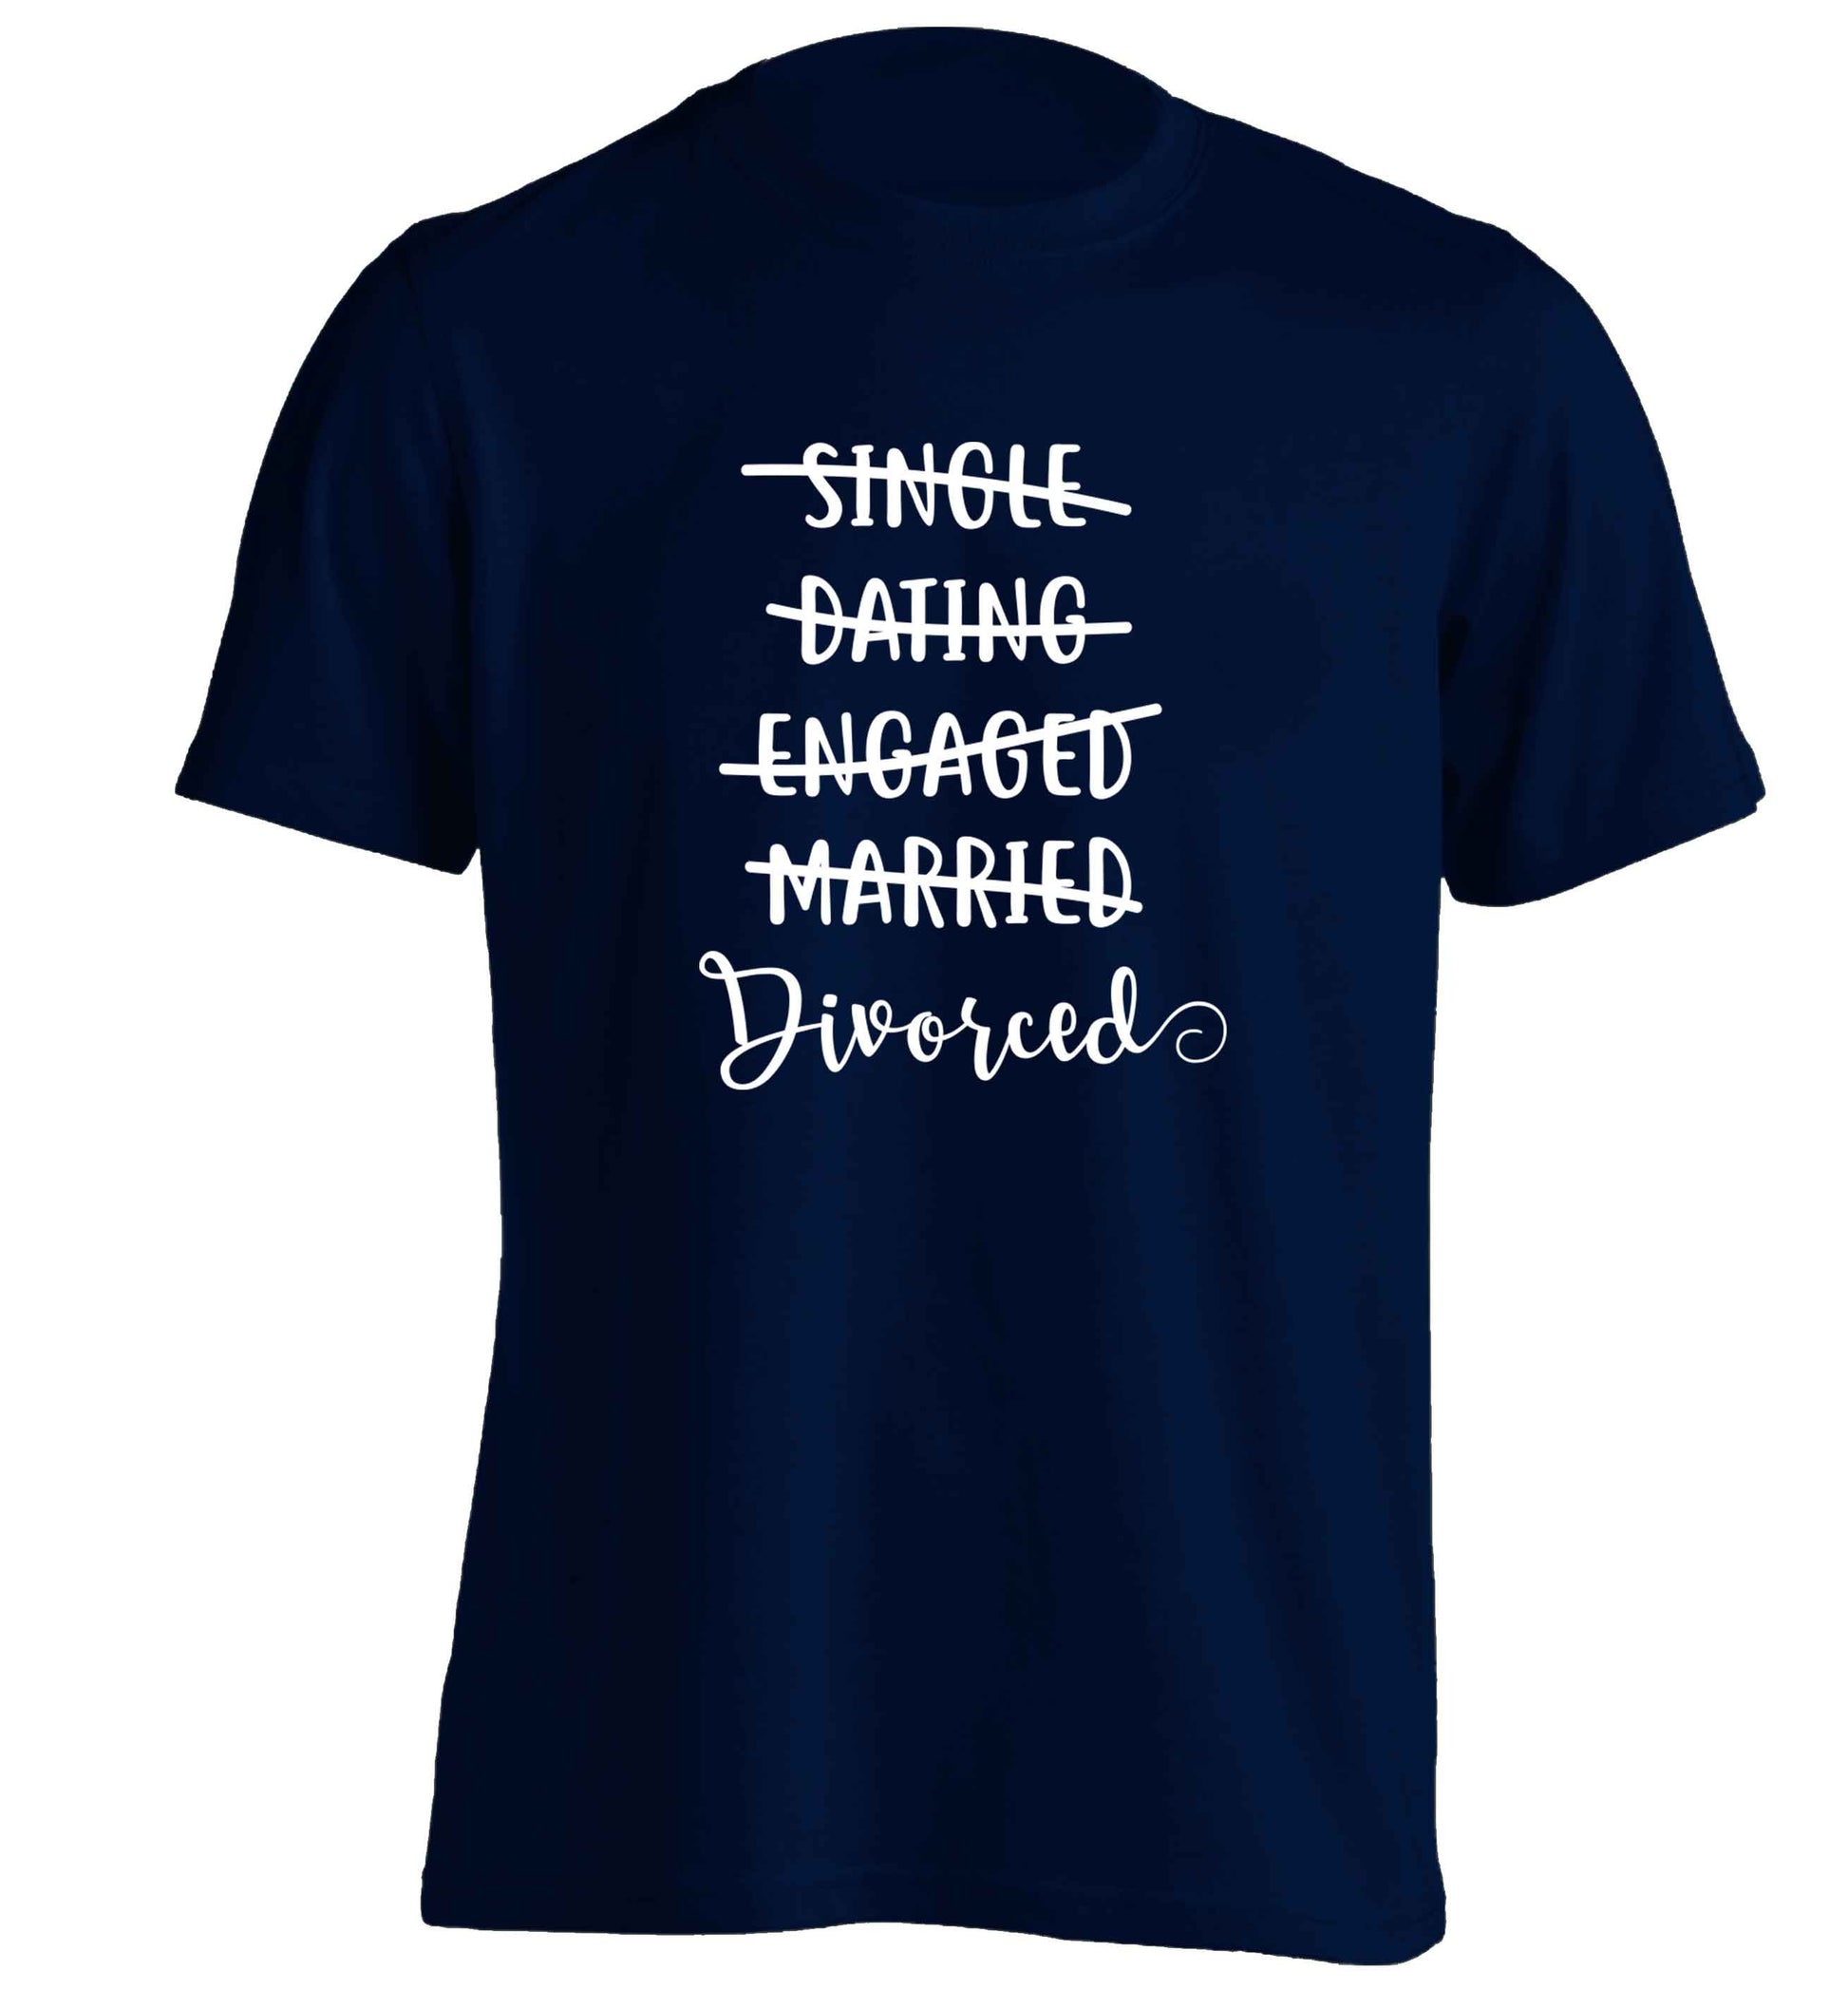 Single, dating, engaged, divorced adults unisex navy Tshirt 2XL